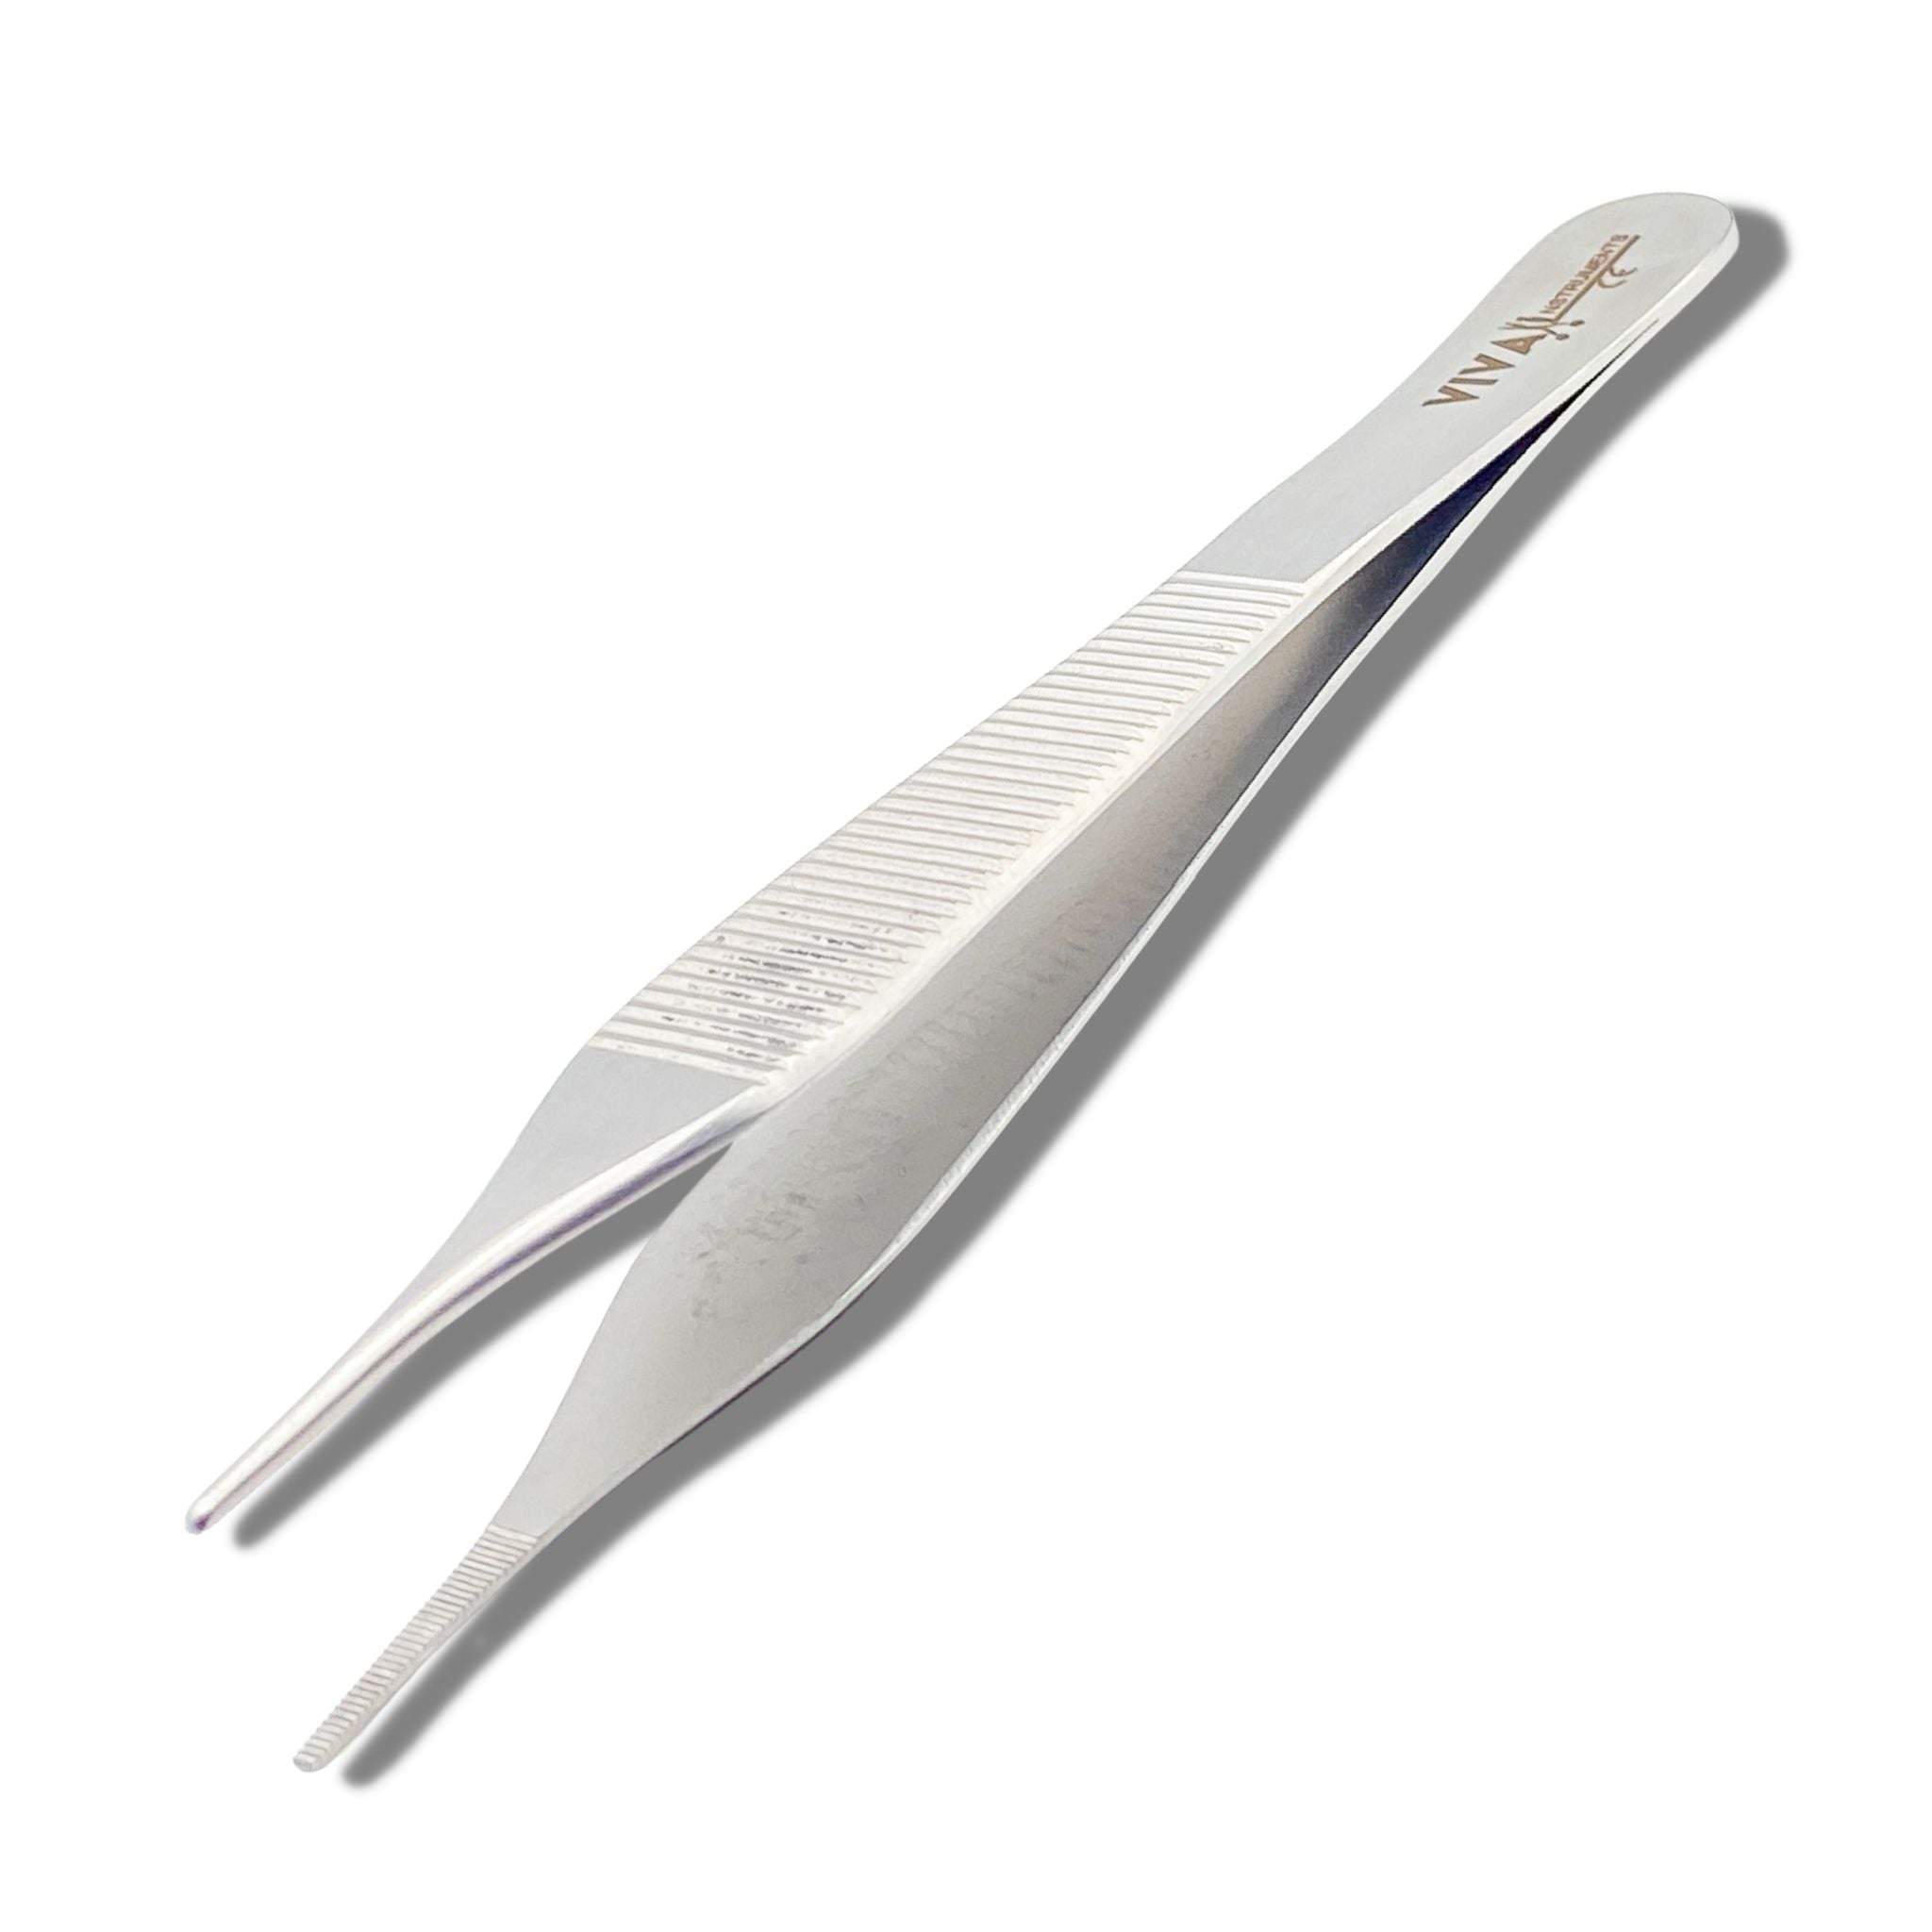 Dissecting Forceps - Adson Surgical Forceps 12.5cm